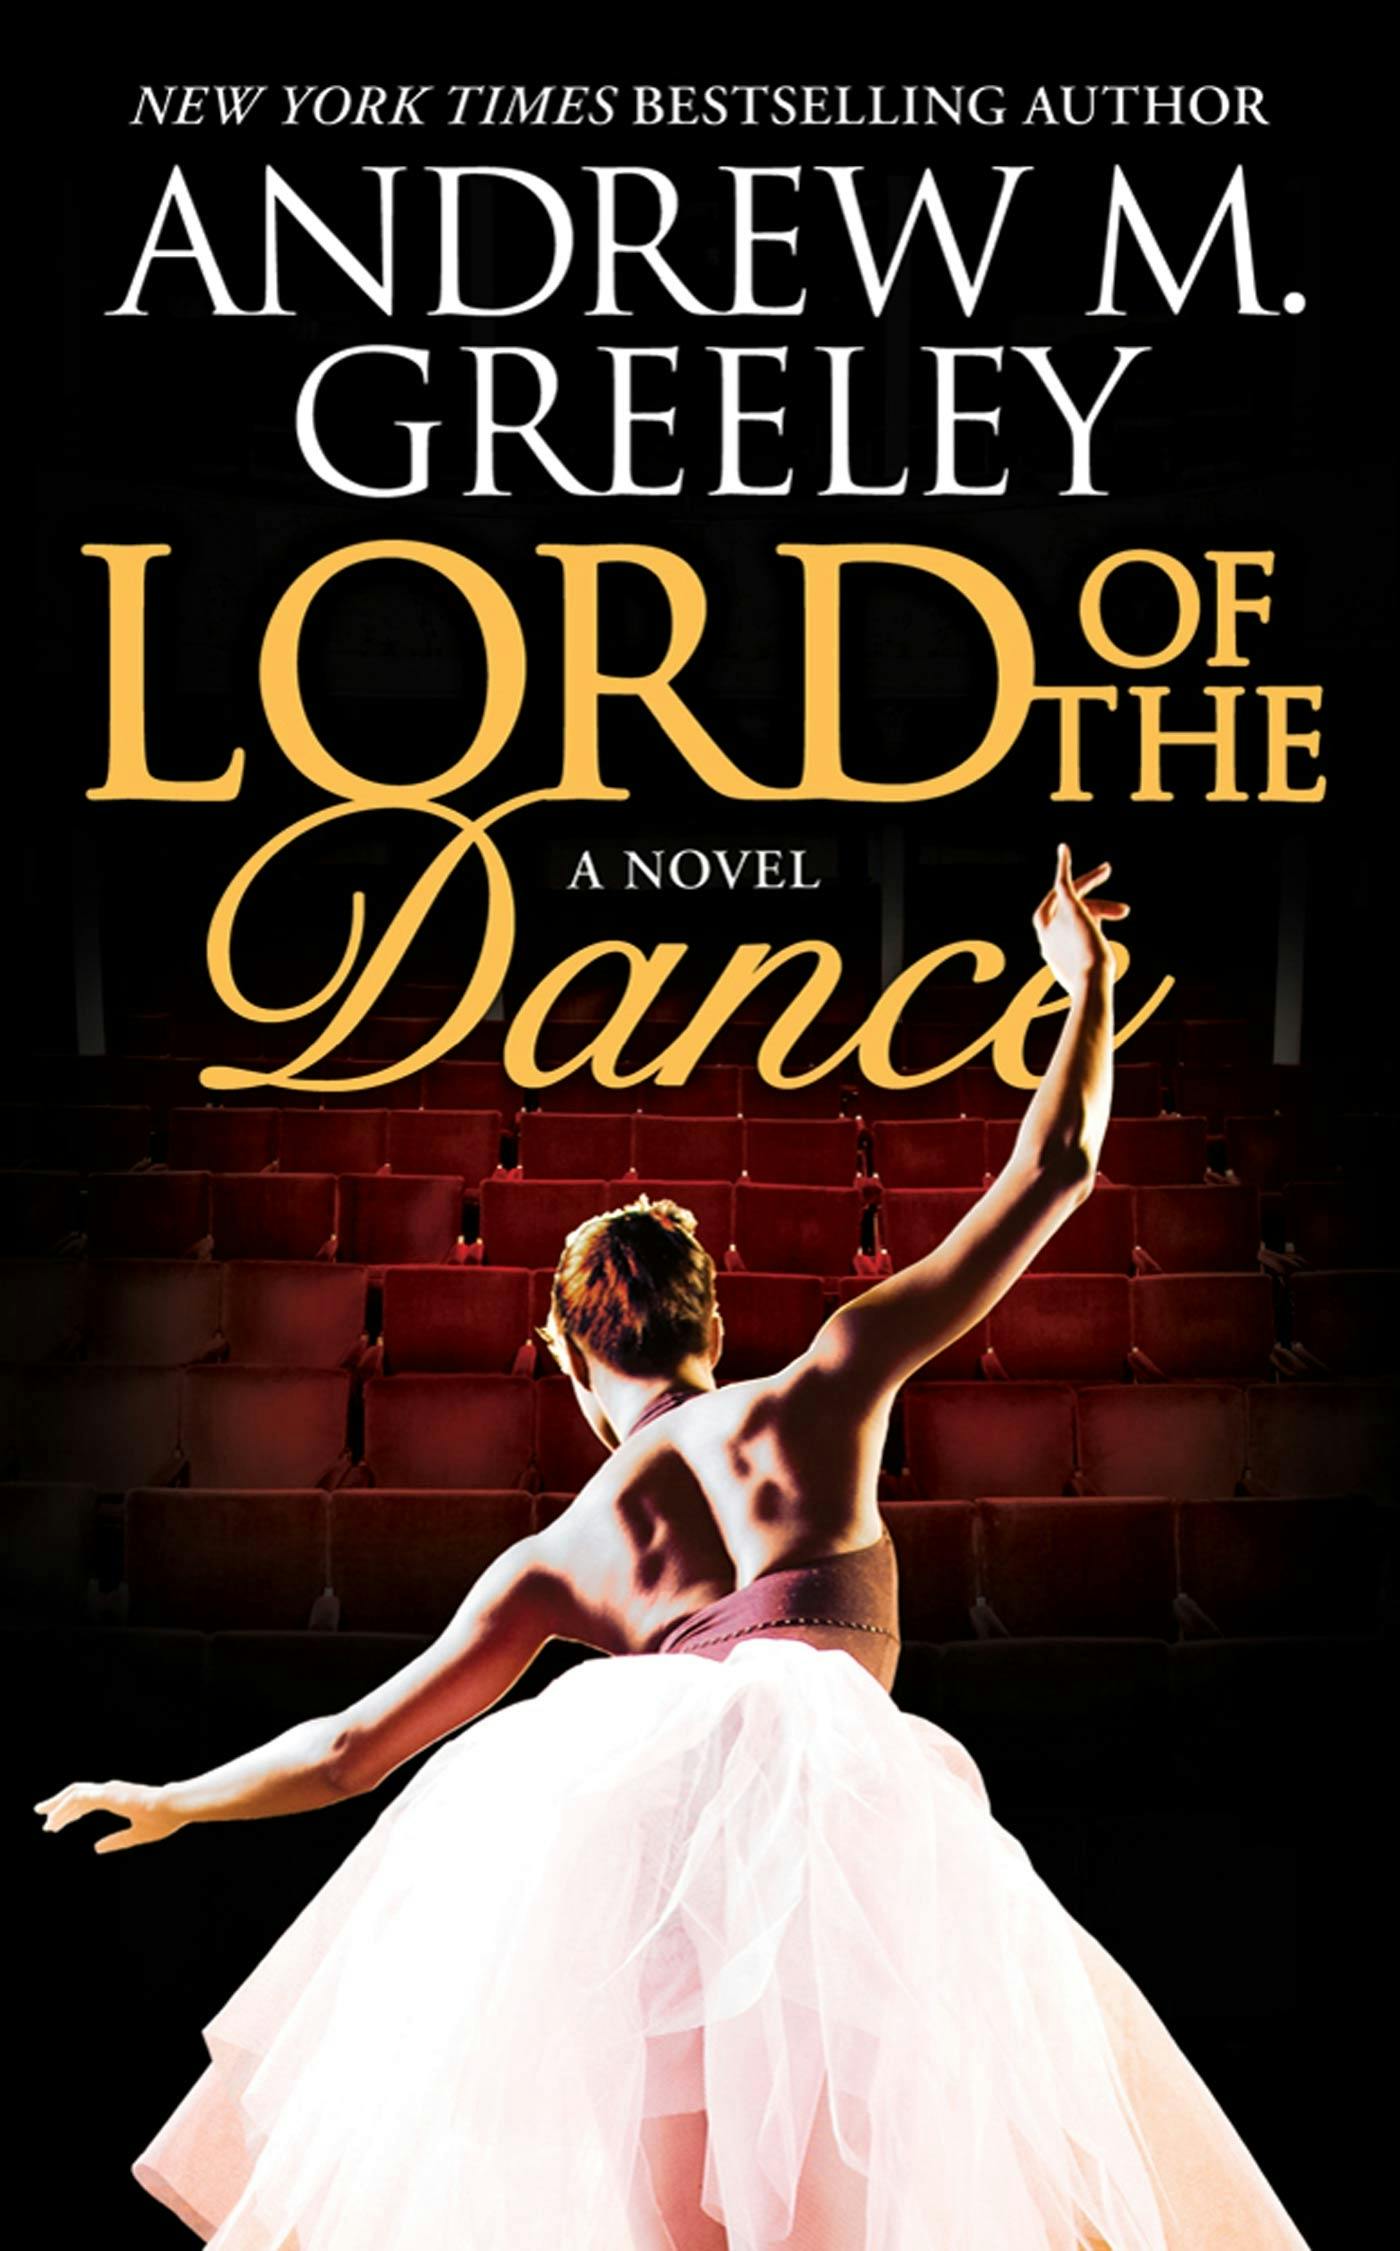 Cover for the book titled as: Lord of the Dance